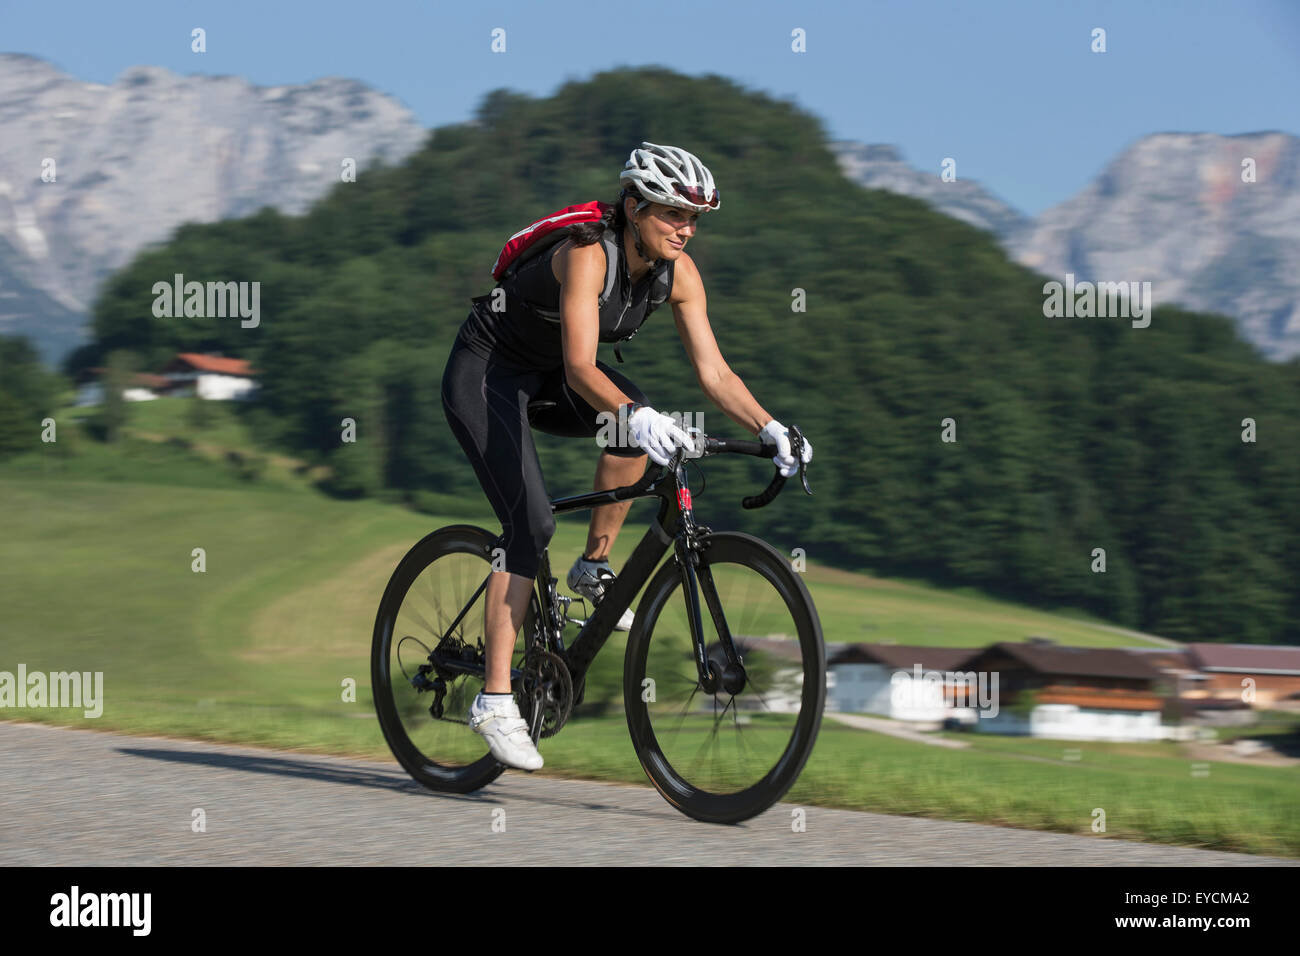 Allemagne, Bad Reichenhall, sportive woman riding bicycle Banque D'Images